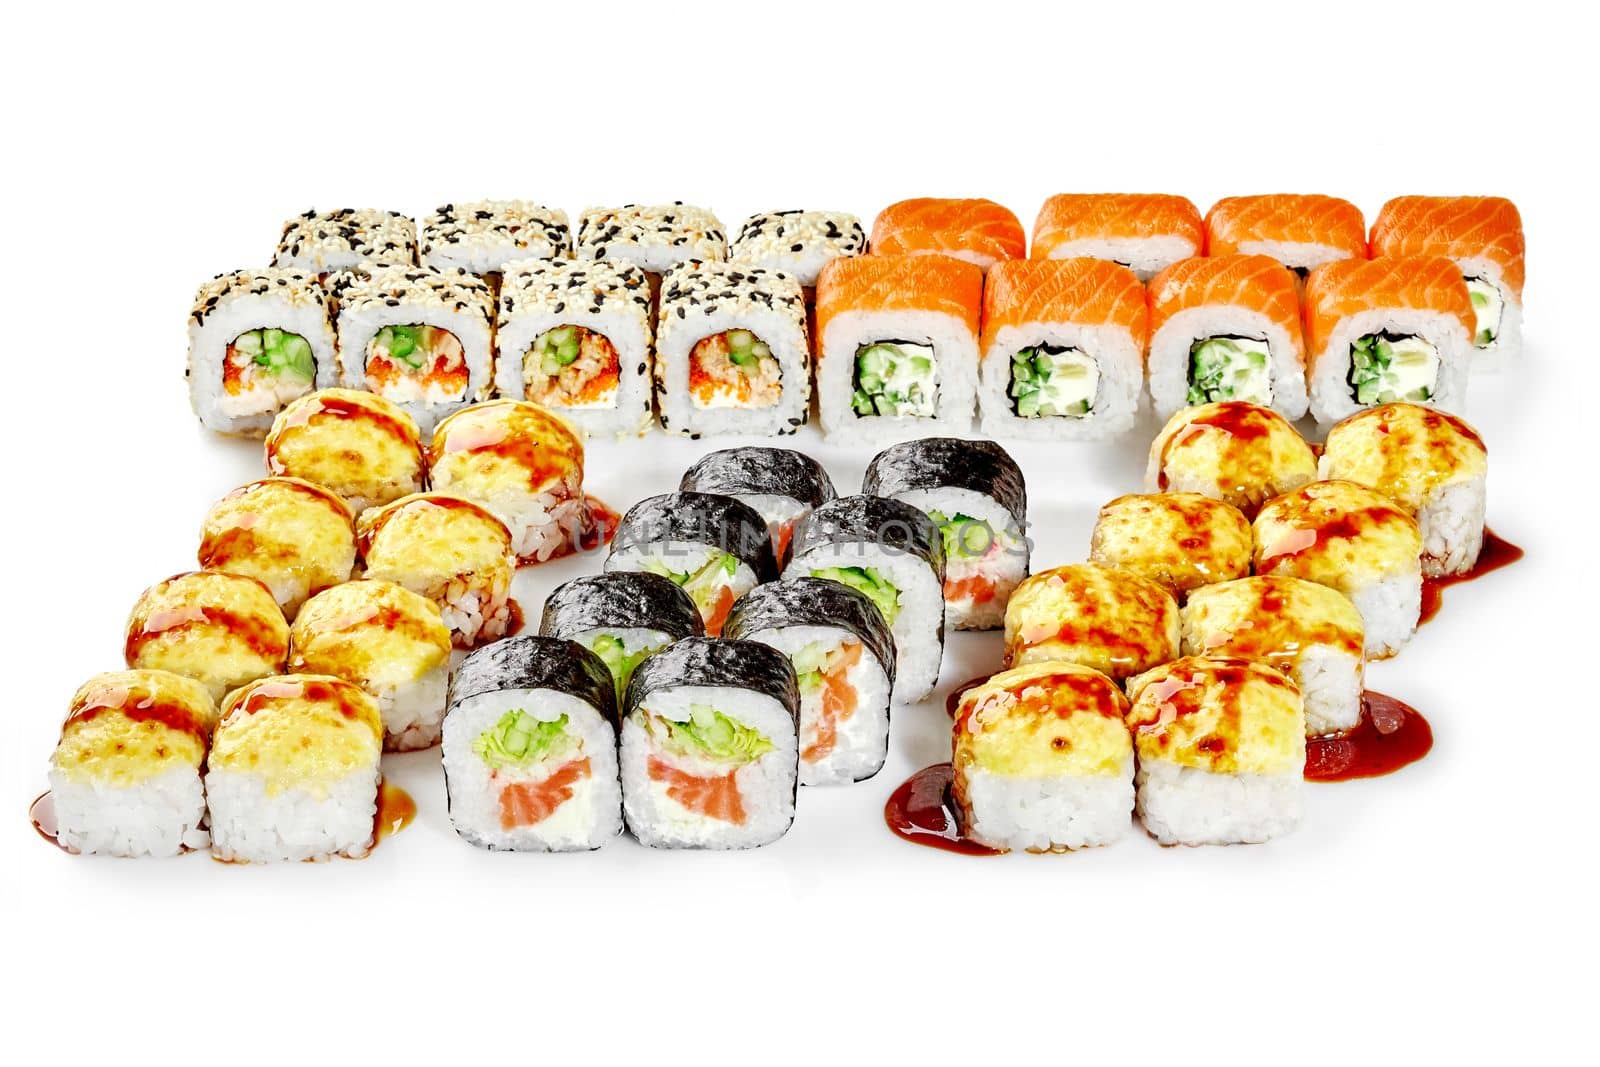 Appetizing set of various sushi rolls with salmon, tobiko roe, cream cheese and vegetables for family dinner in Japanese style on white background. Popular snacks concept